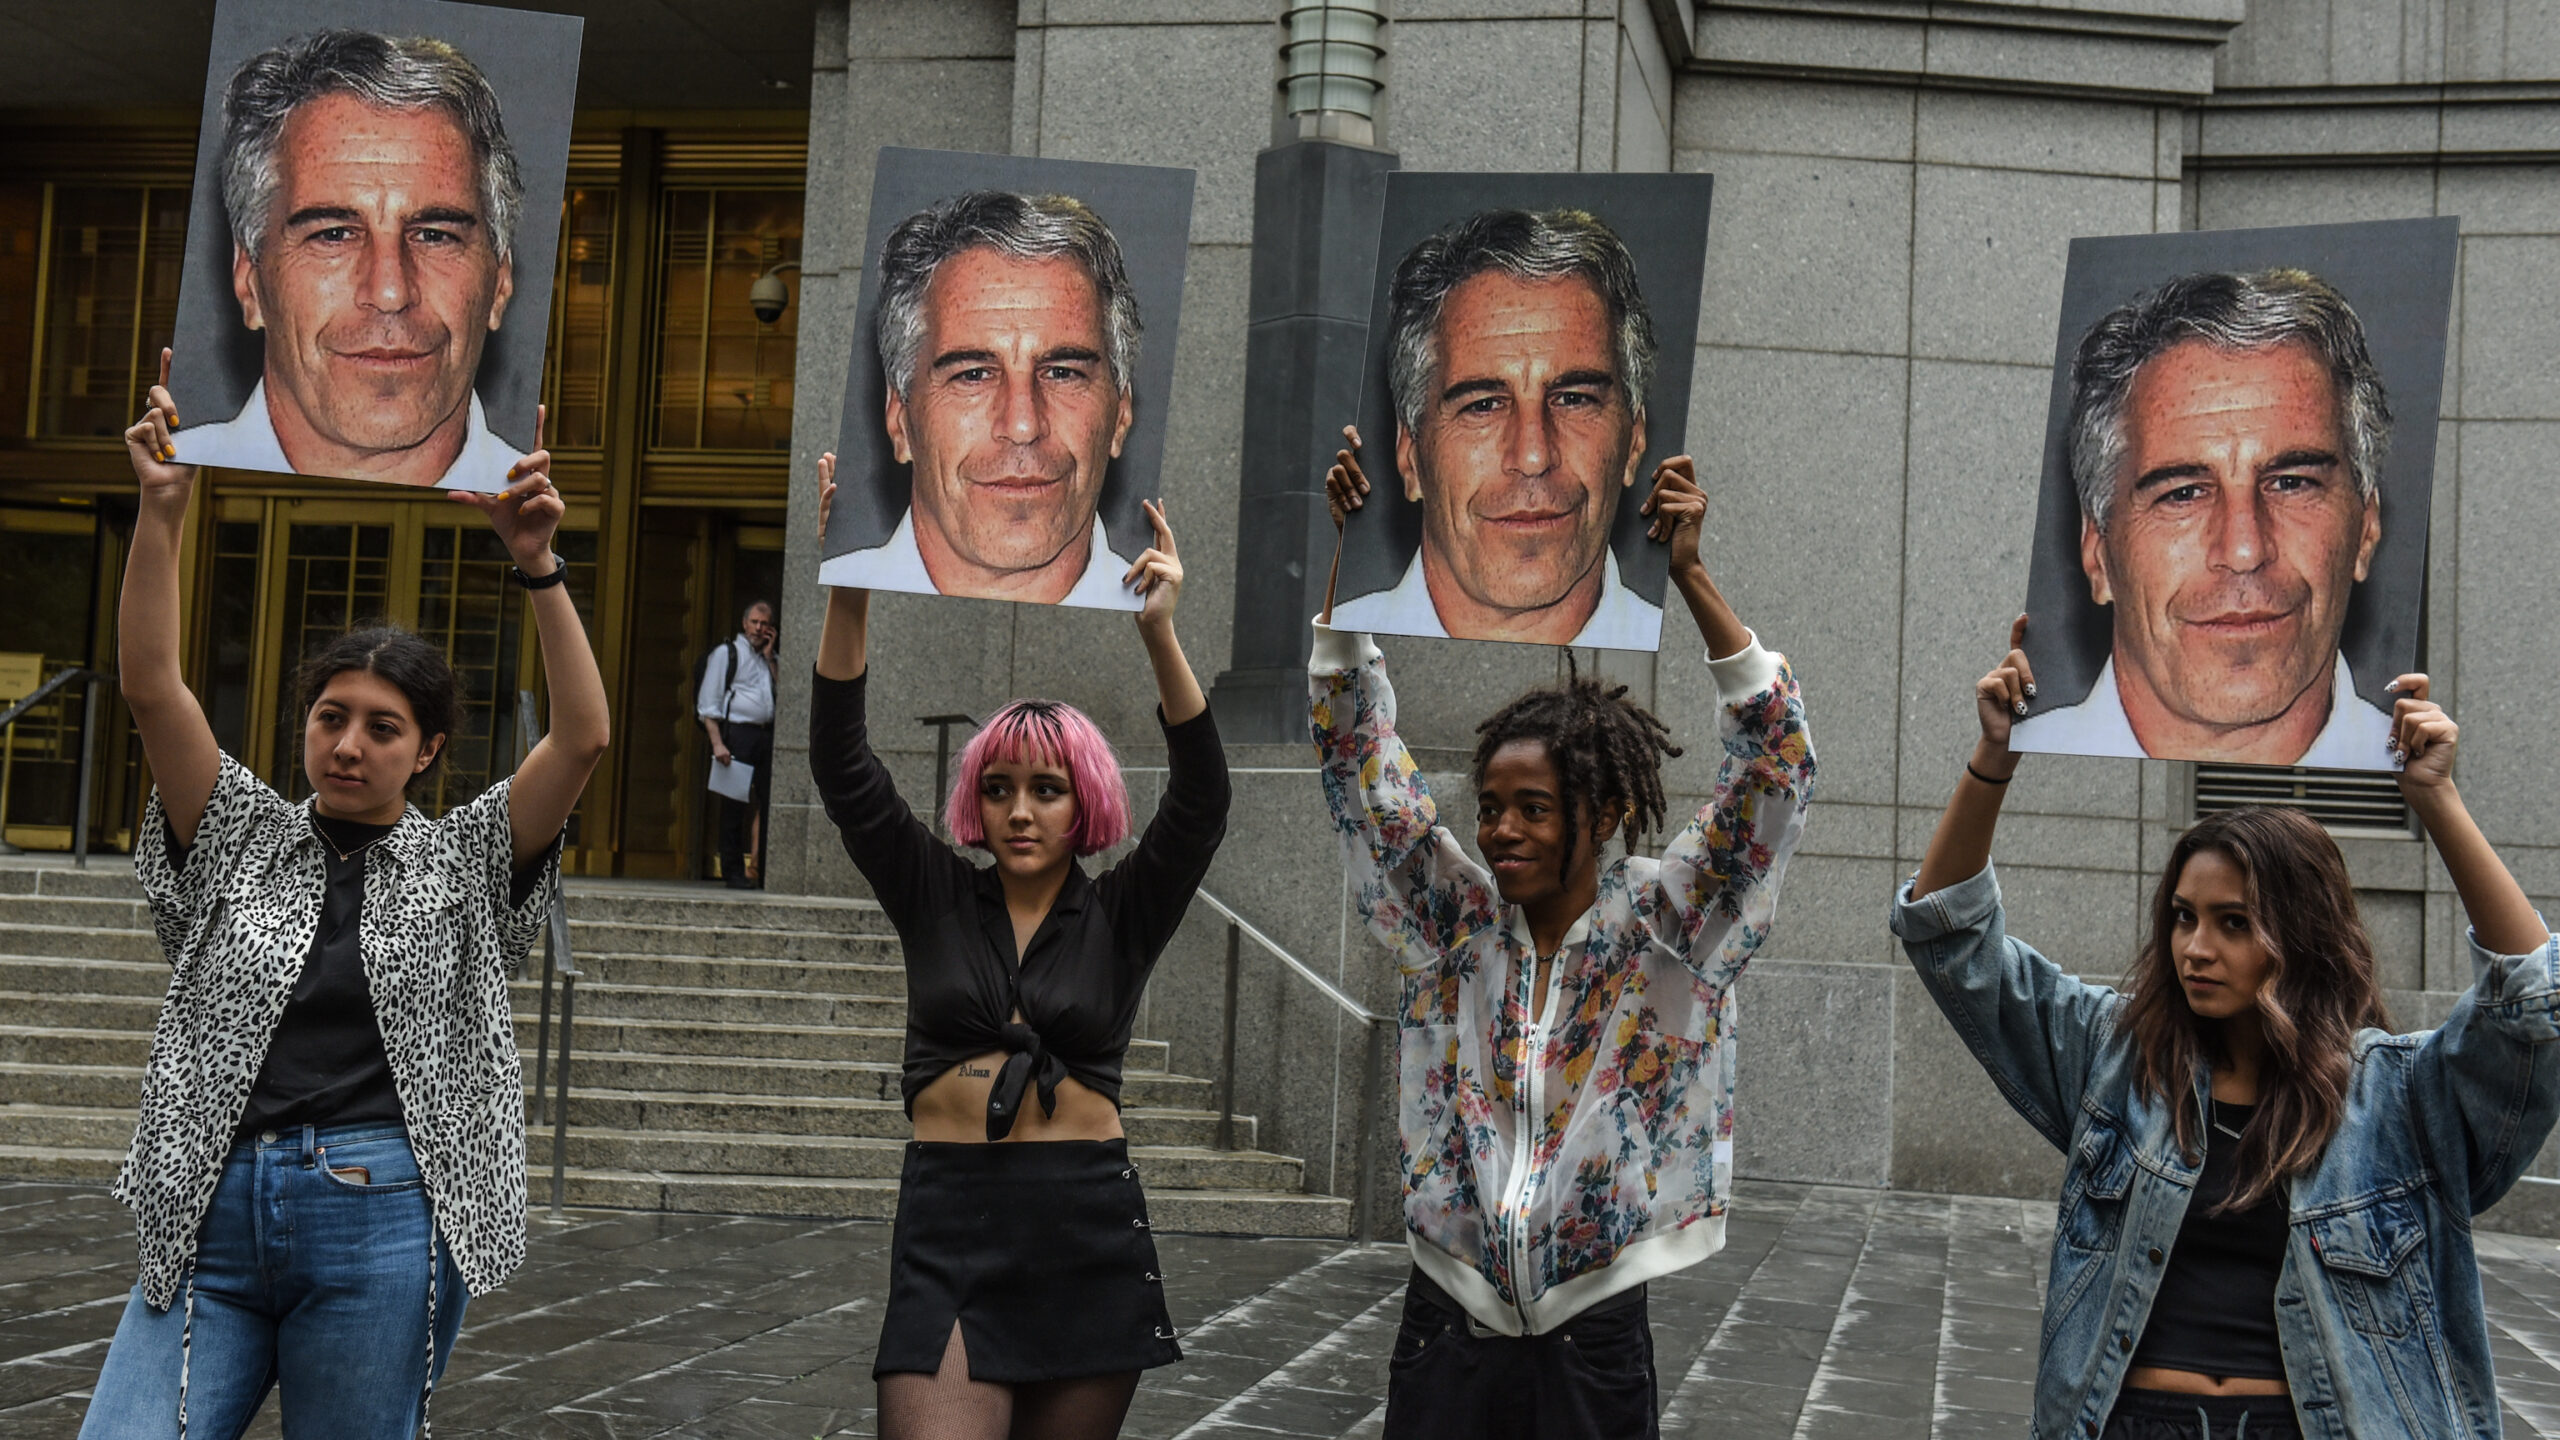 What to know about the Jeffrey Epstein ‘John Doe’ files that were just unsealed